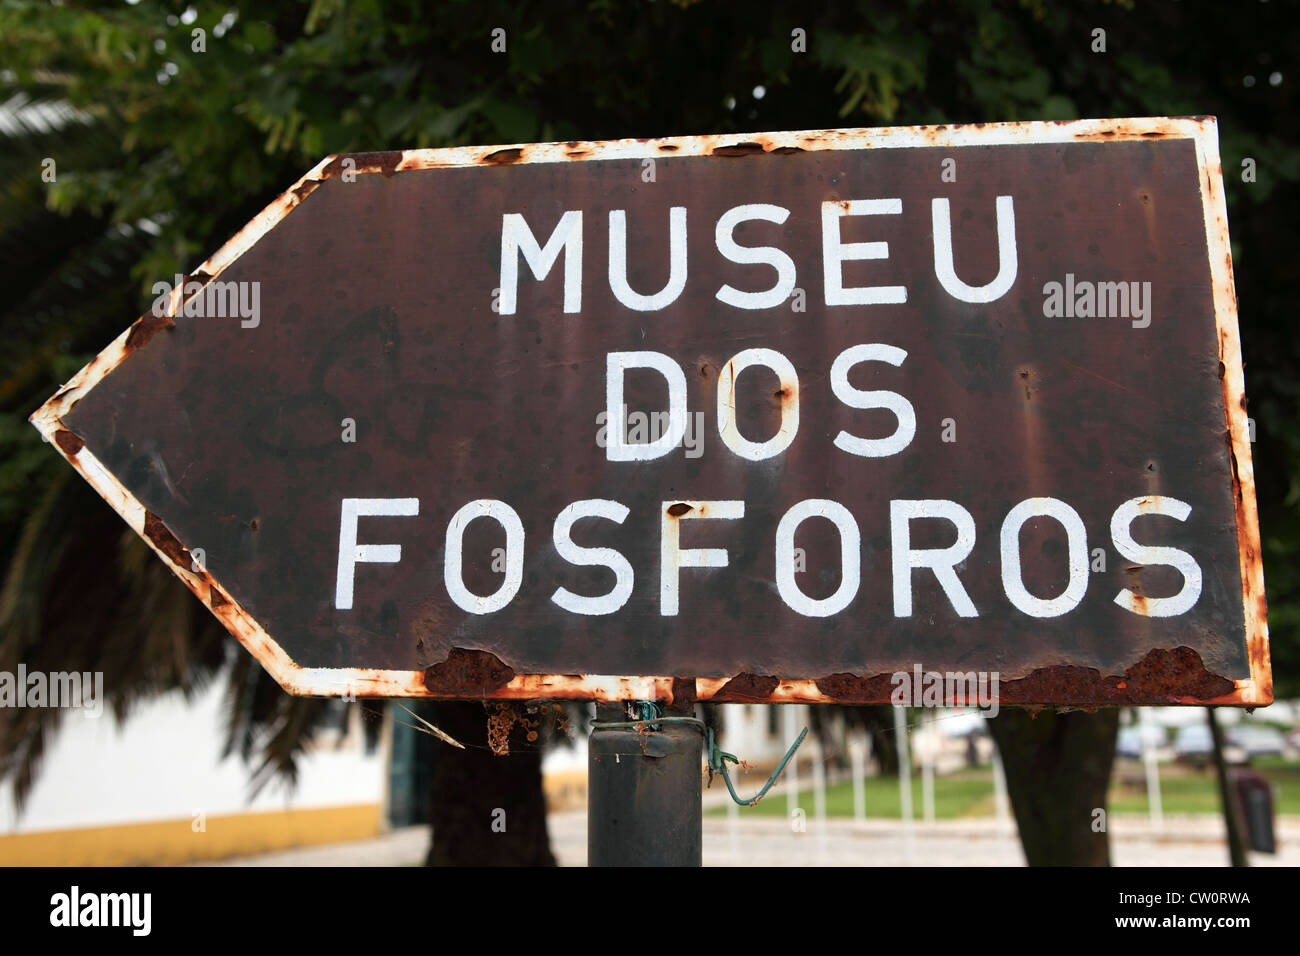 Rusted, weatherbeaten sign for the Matchbox Museum ('Museu dos Fosforos') in Tomar, Portugal. Stock Photo